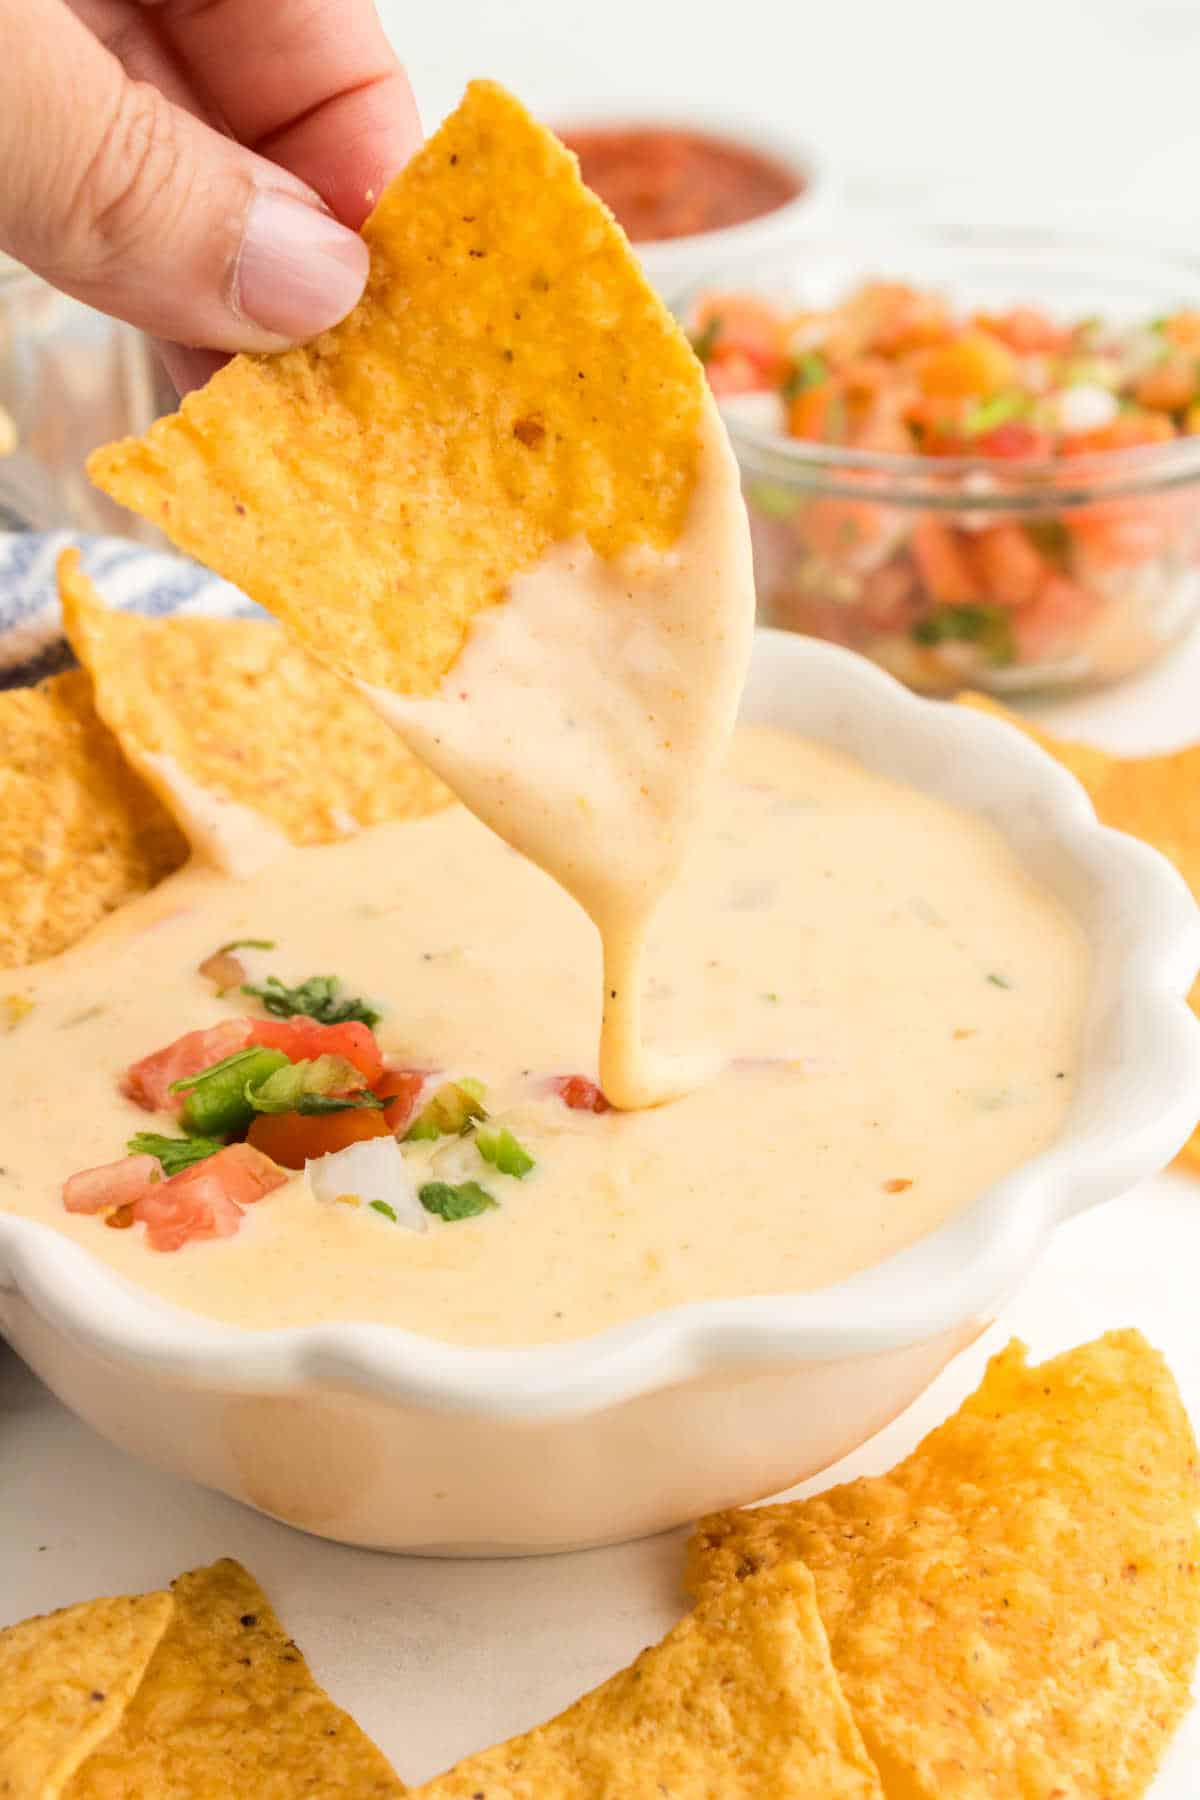 A hand dipping a tortilla chip in queso.